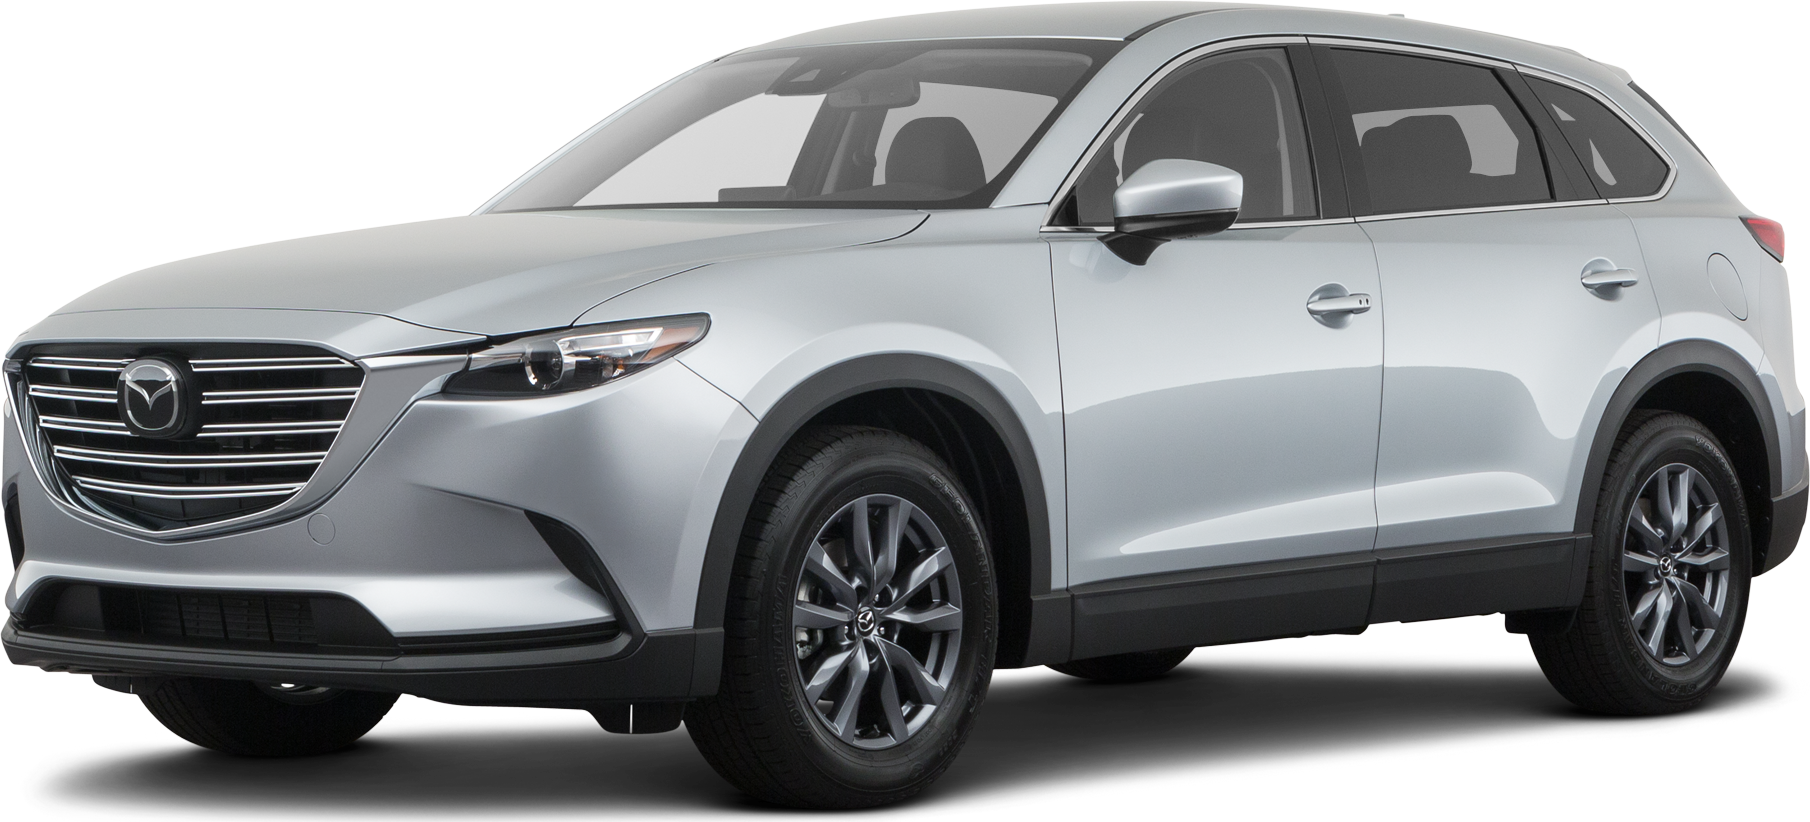 2021 Mazda Cx 9 Price Value Ratings And Reviews Kelley Blue Book